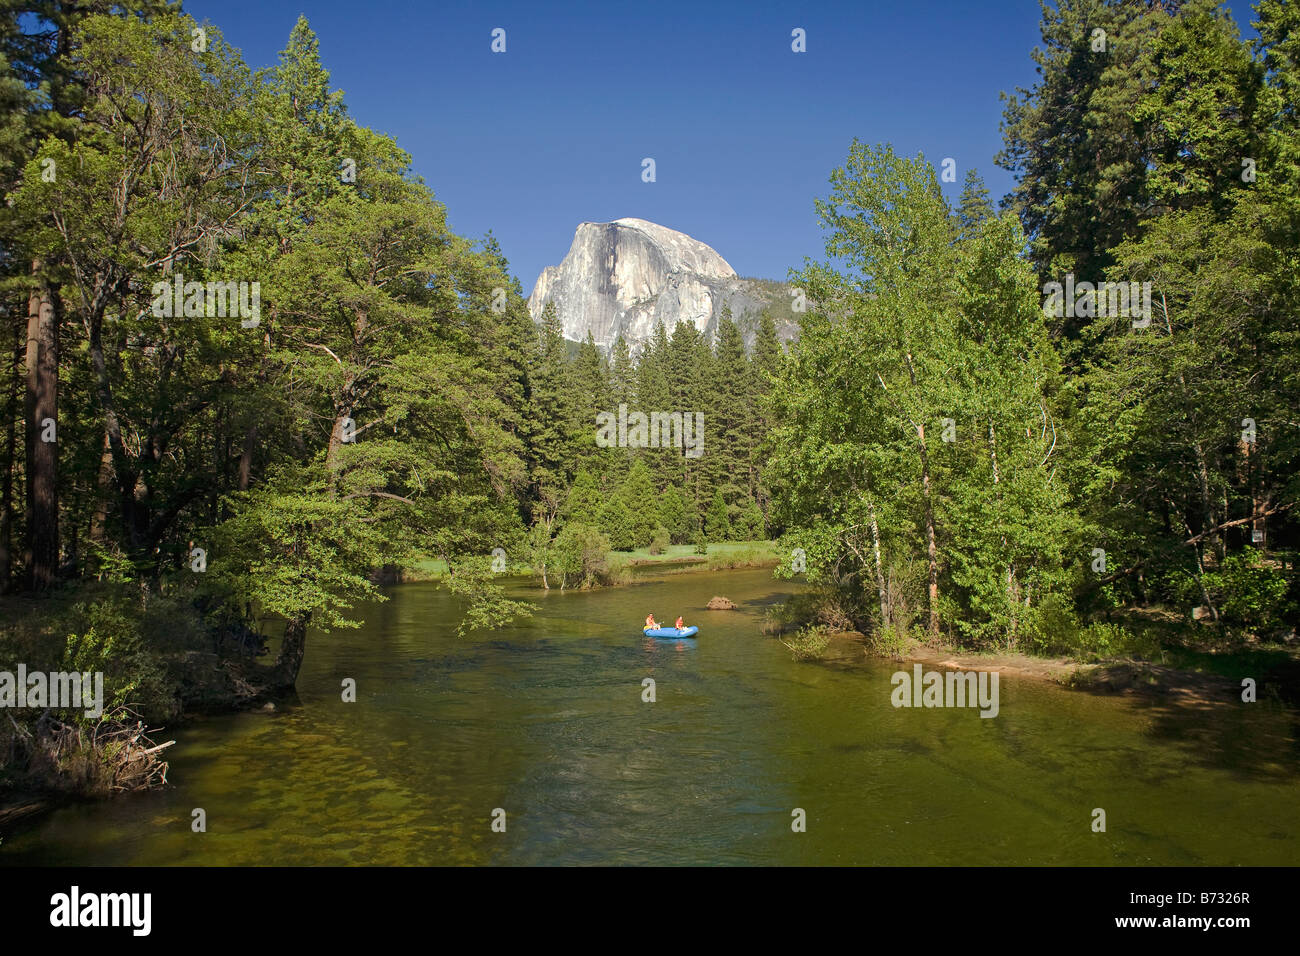 CALIFORNIA - Half Dome towering over the rafters floating down the Merced River in Yosemite Valley;  Yosemite National Park. Stock Photo